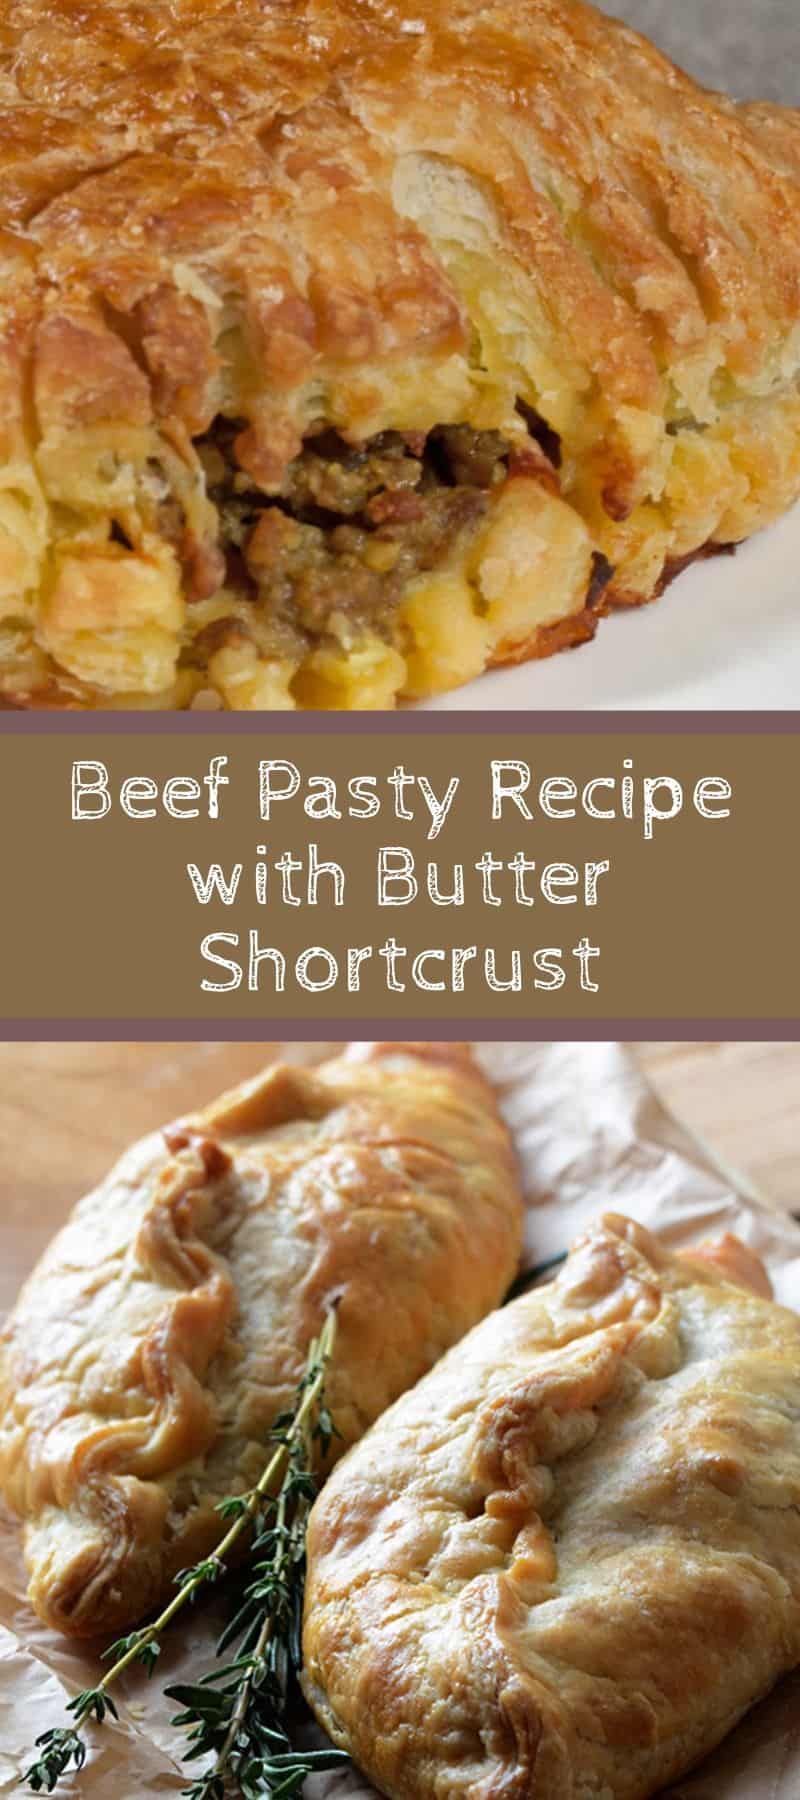 Beef Pasty Recipe with Butter Shortcrust 3